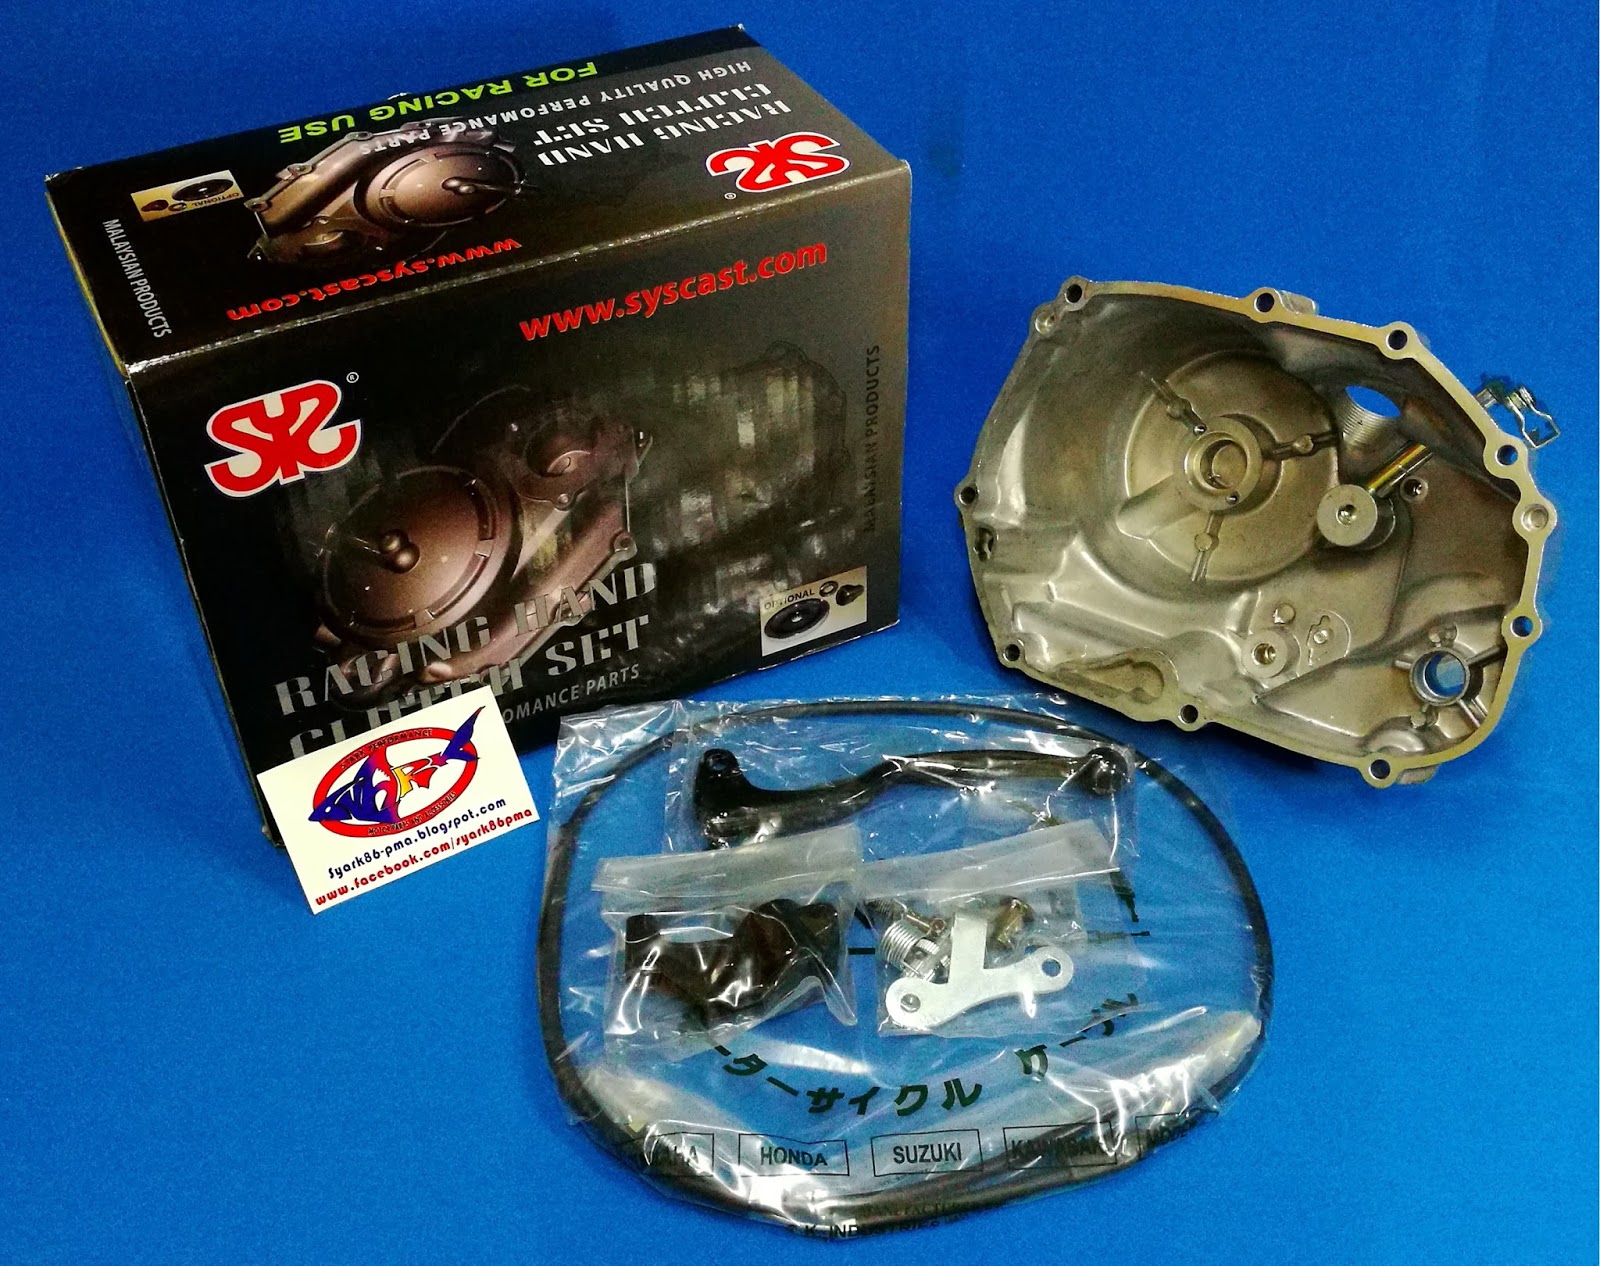 Syark Performance Motor Parts And Accessories Online Shop ...